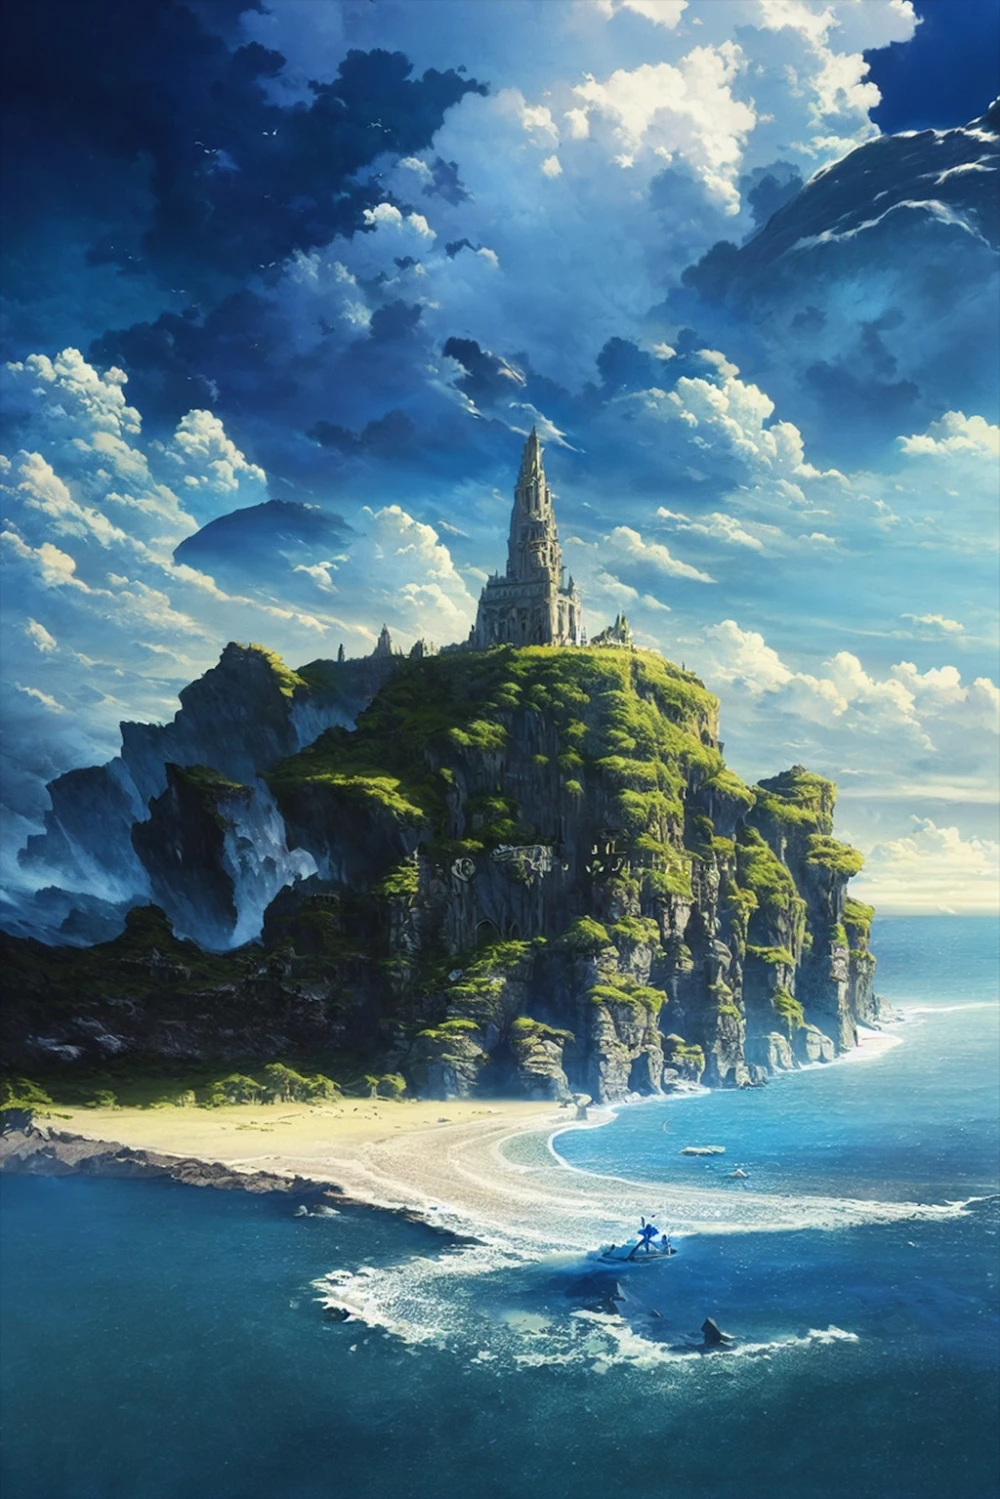 scenery-anime-style-all-ages-6